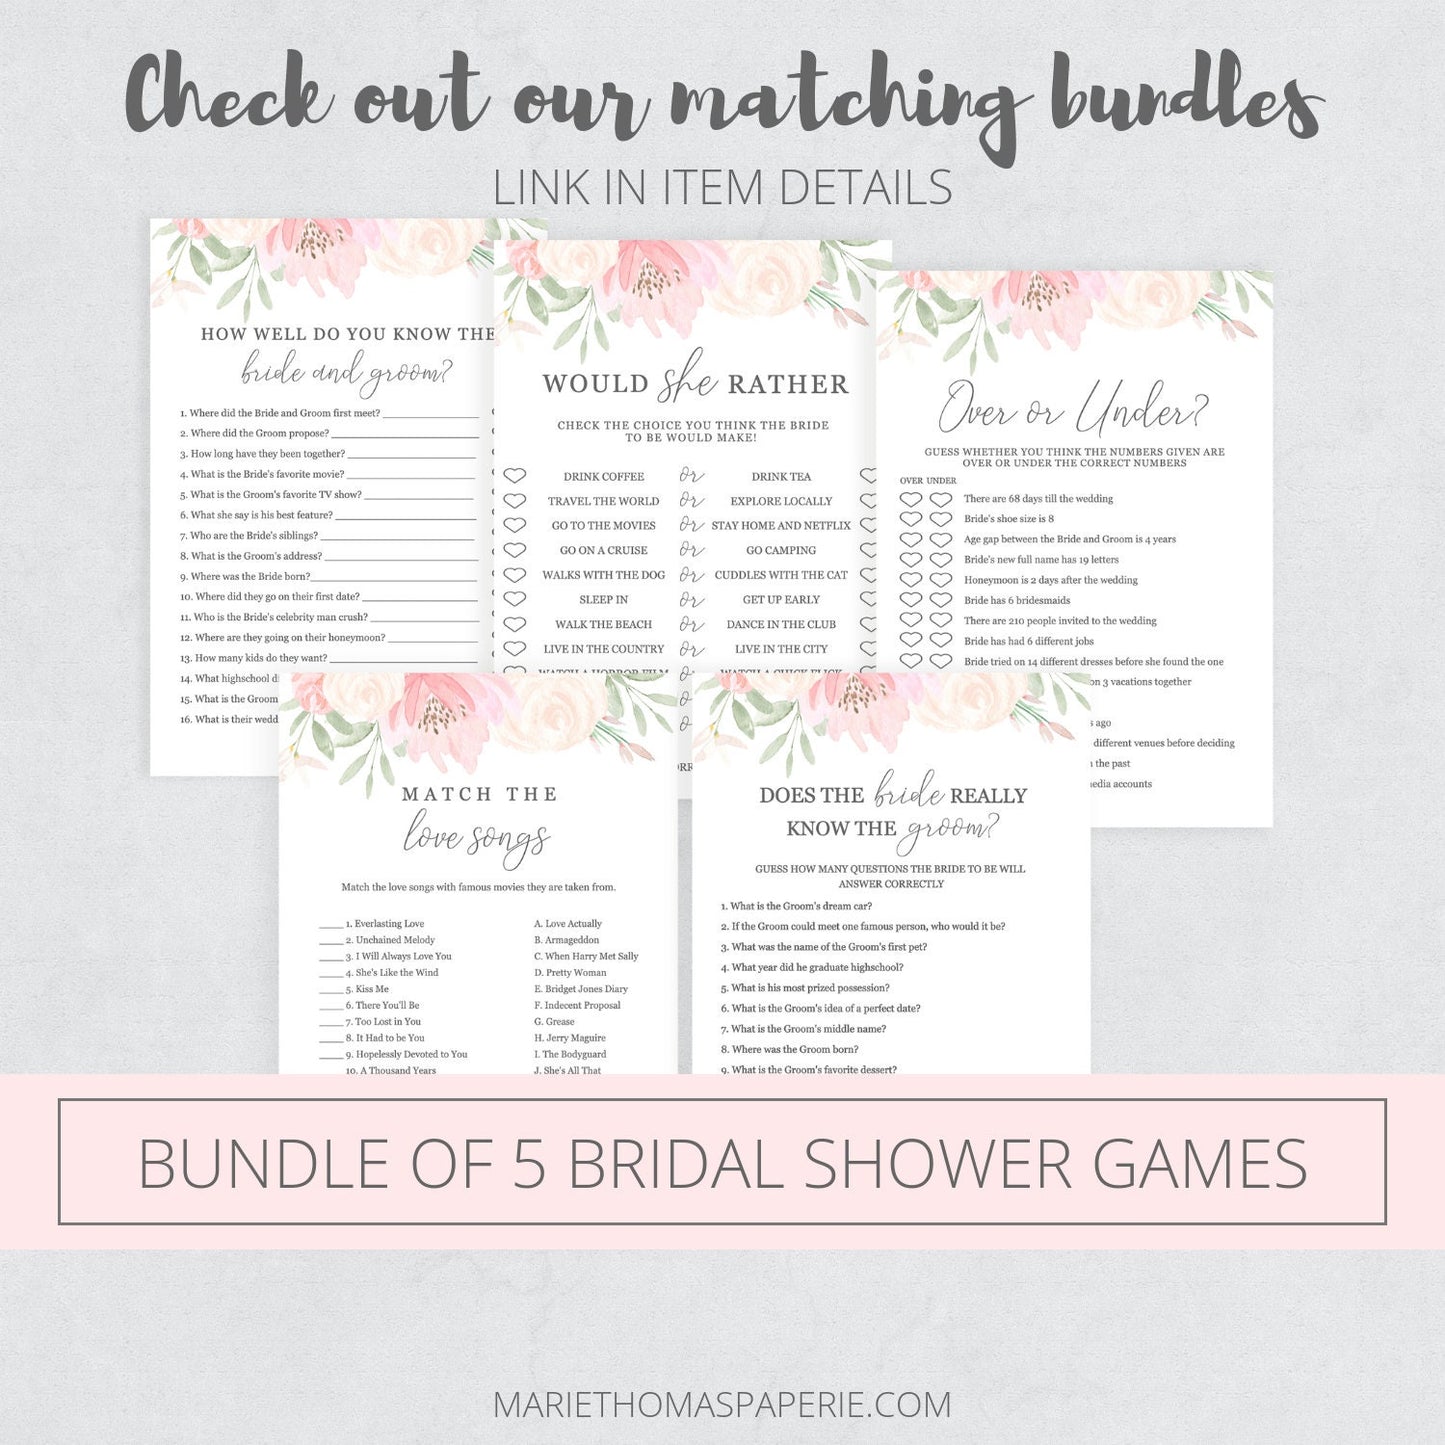 Editable How Well Do You Know the Bride Bridal Shower Games Blush Pink Bridal Game Template